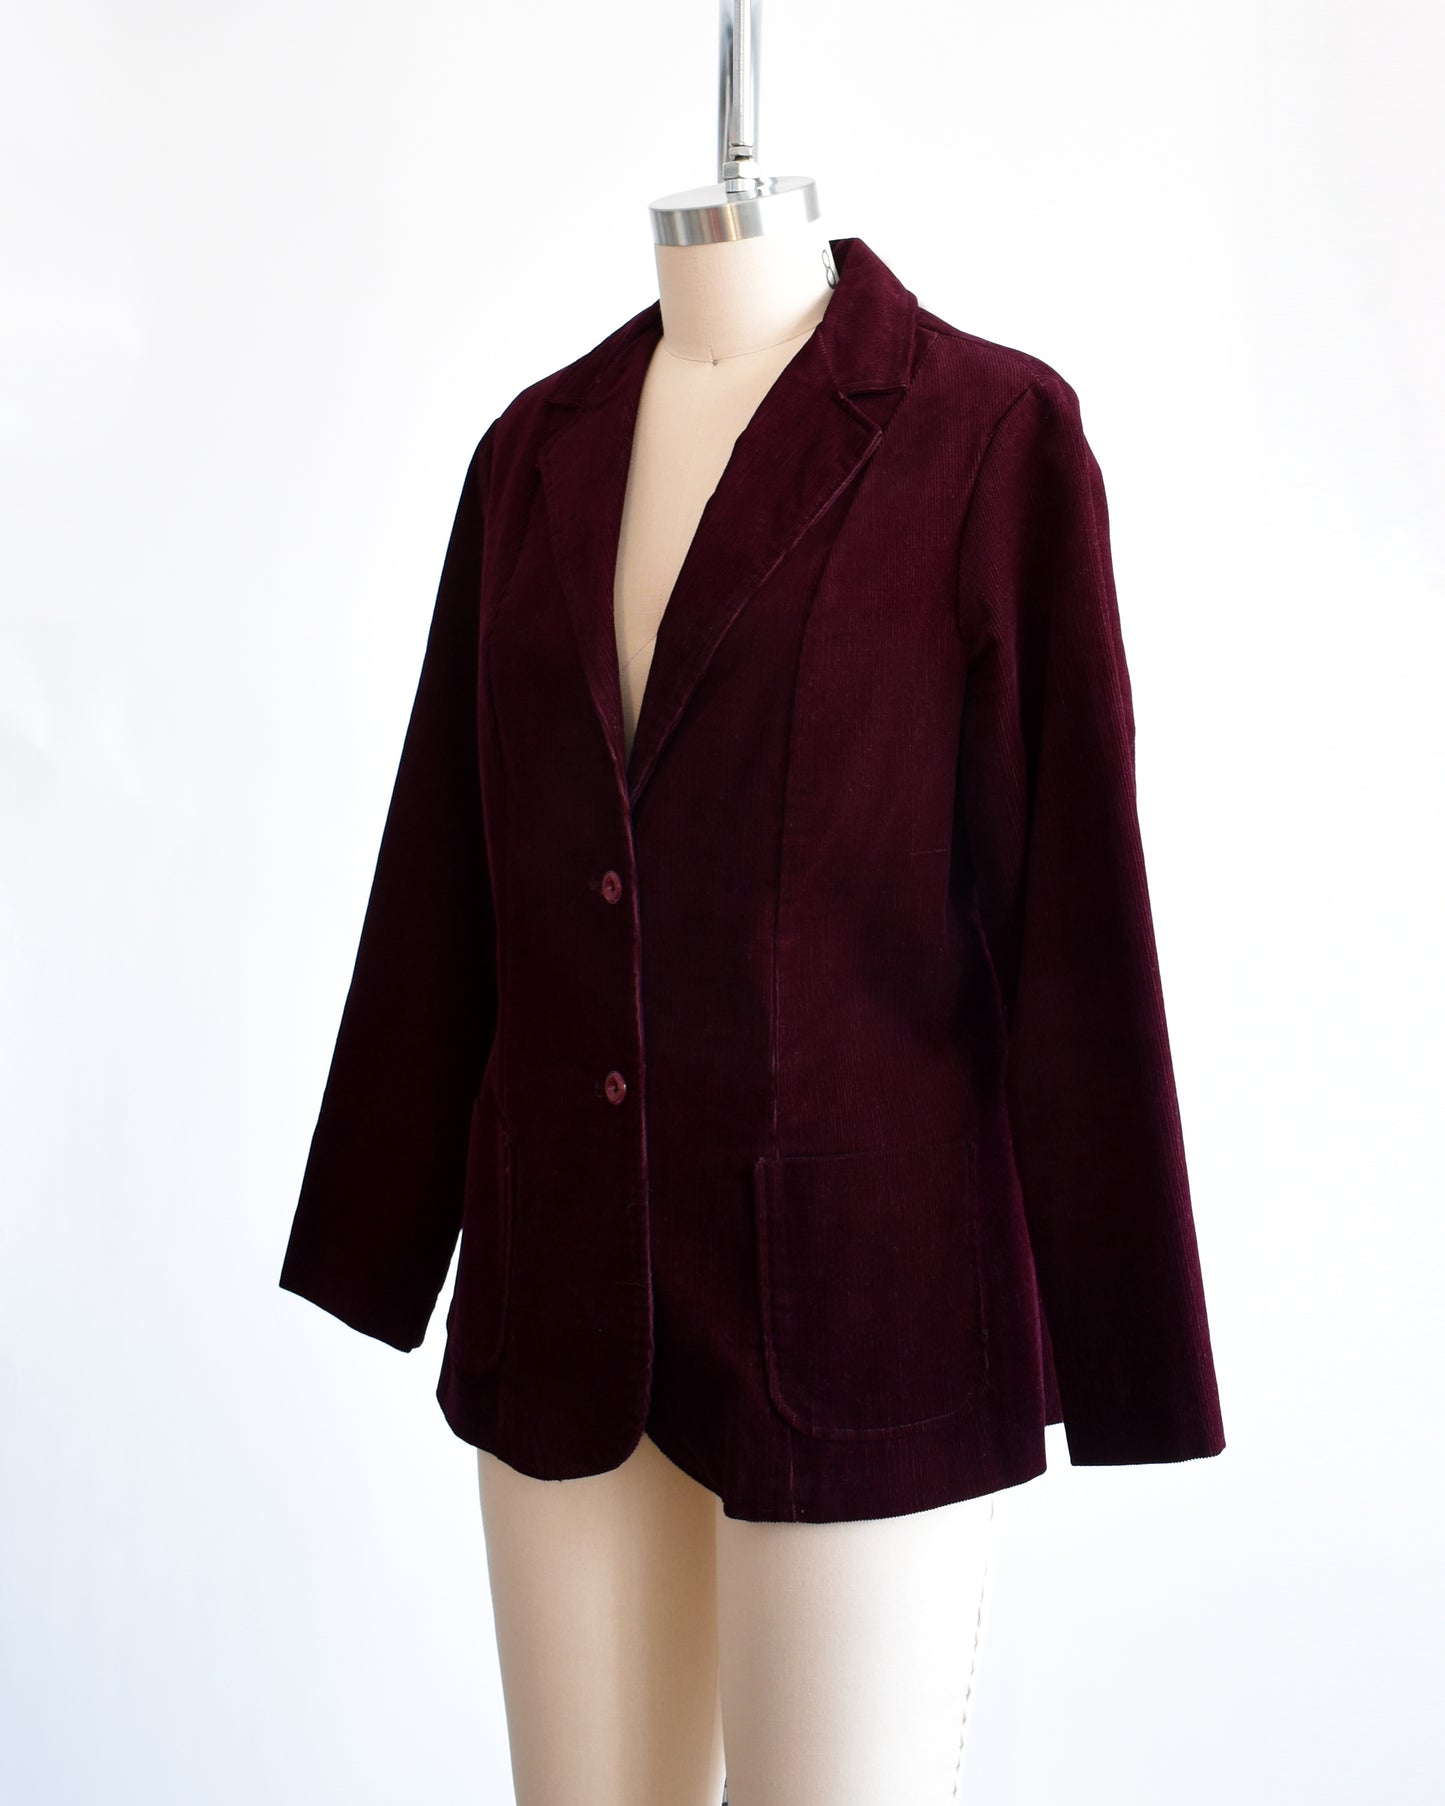 Side front view of  a vintage 1980s burgundy corduroy blazer features two plastic buttons on the front and two front patch pockets on each side.